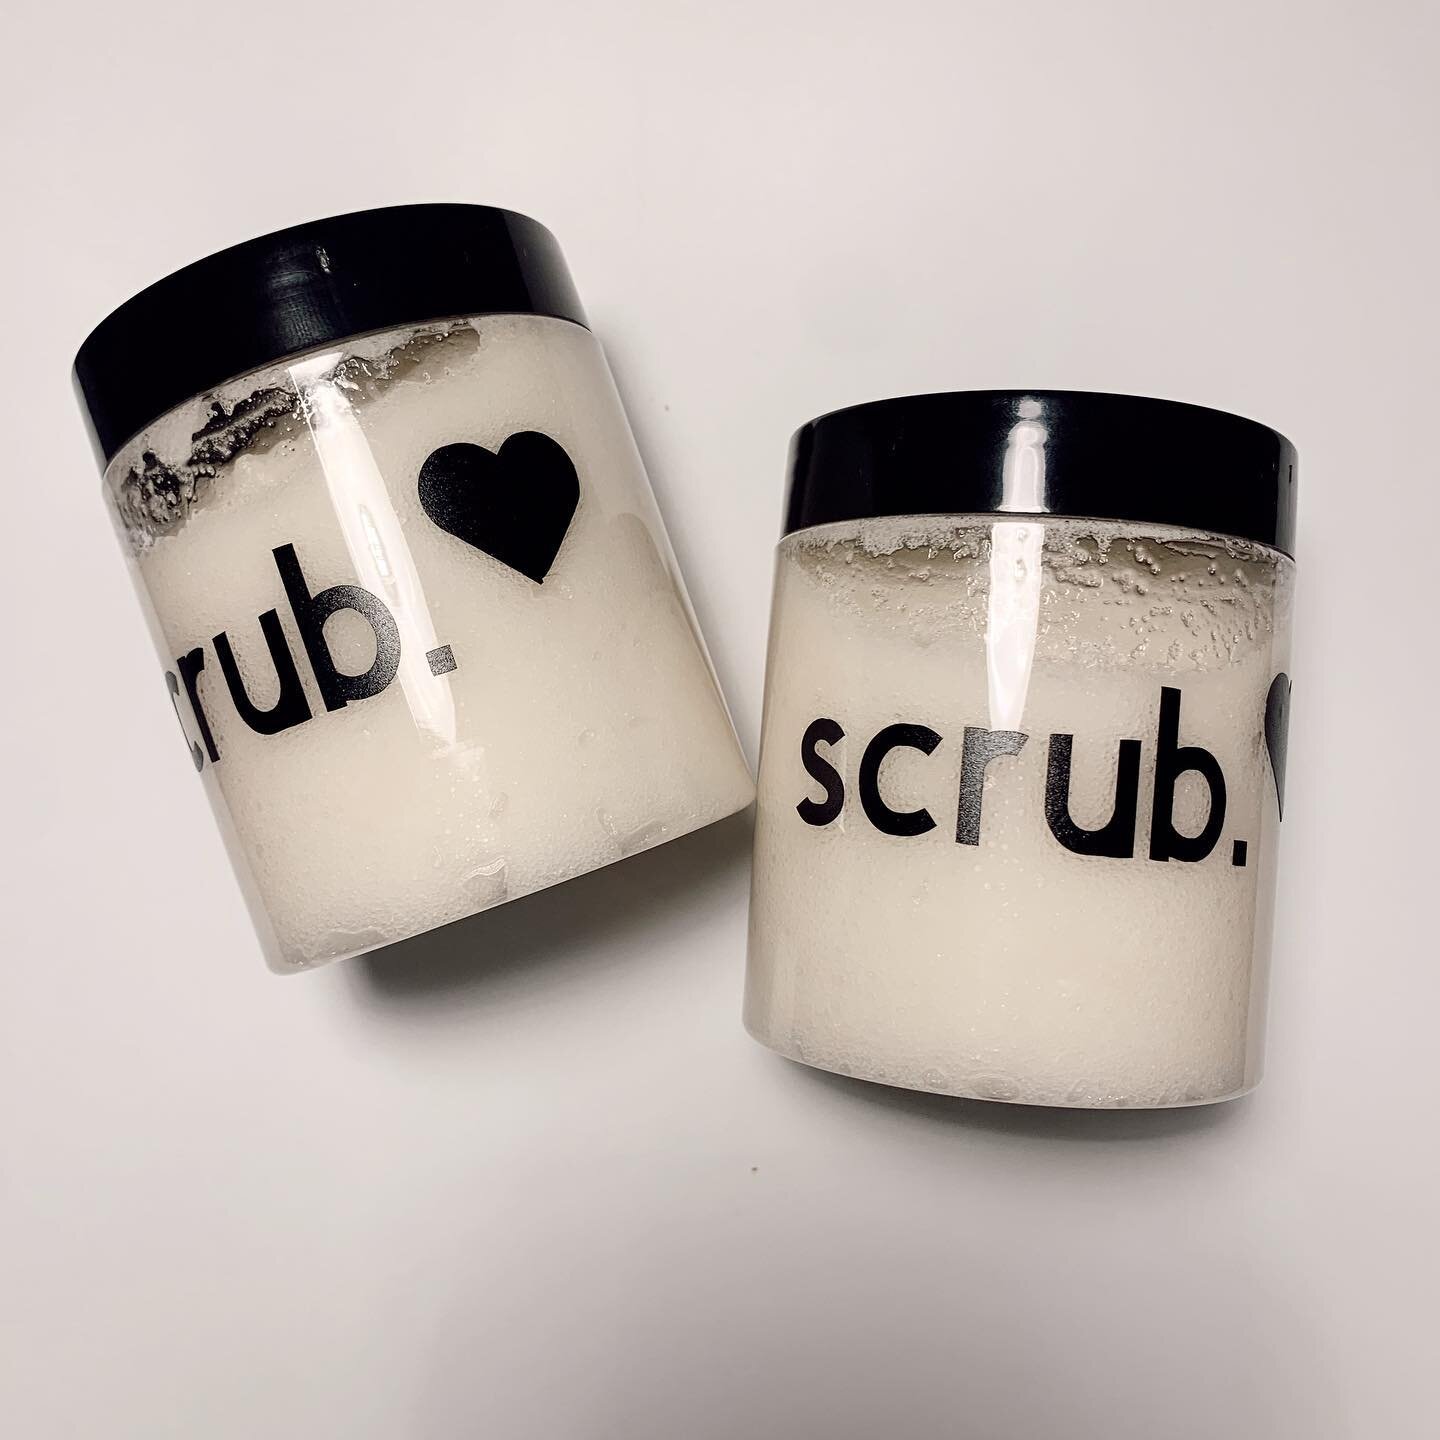 For those asking, all products have been restocked online and in studio. This is with the exception of the peppermint face scrub as I&rsquo;m working on re-formulating it. A new body scrub scent with ginger, clove, sweet orange and lemon is also now 